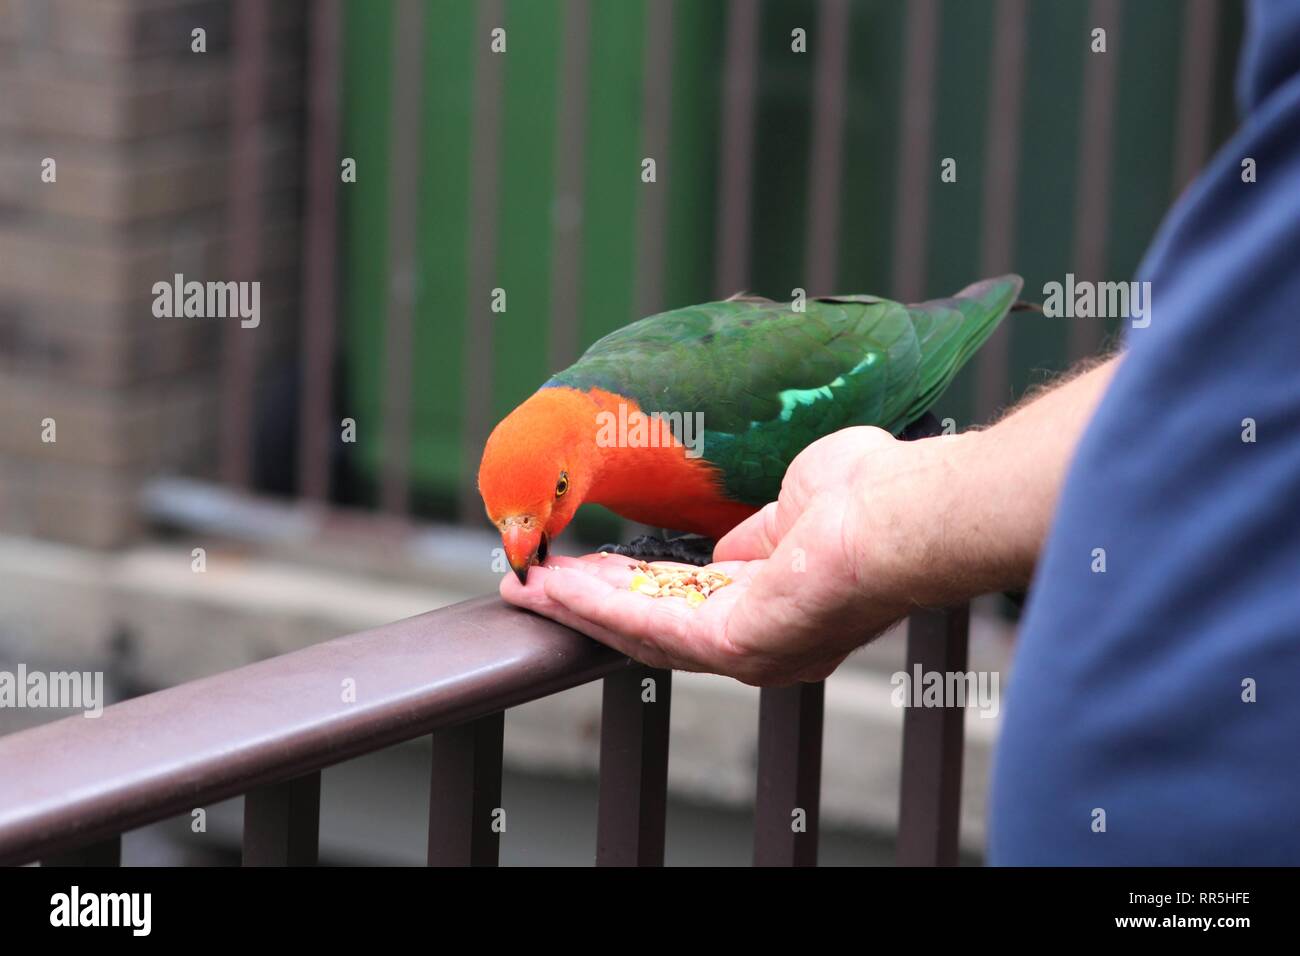 Red and green parrot biting the hand that is feeding it. Stock Photo